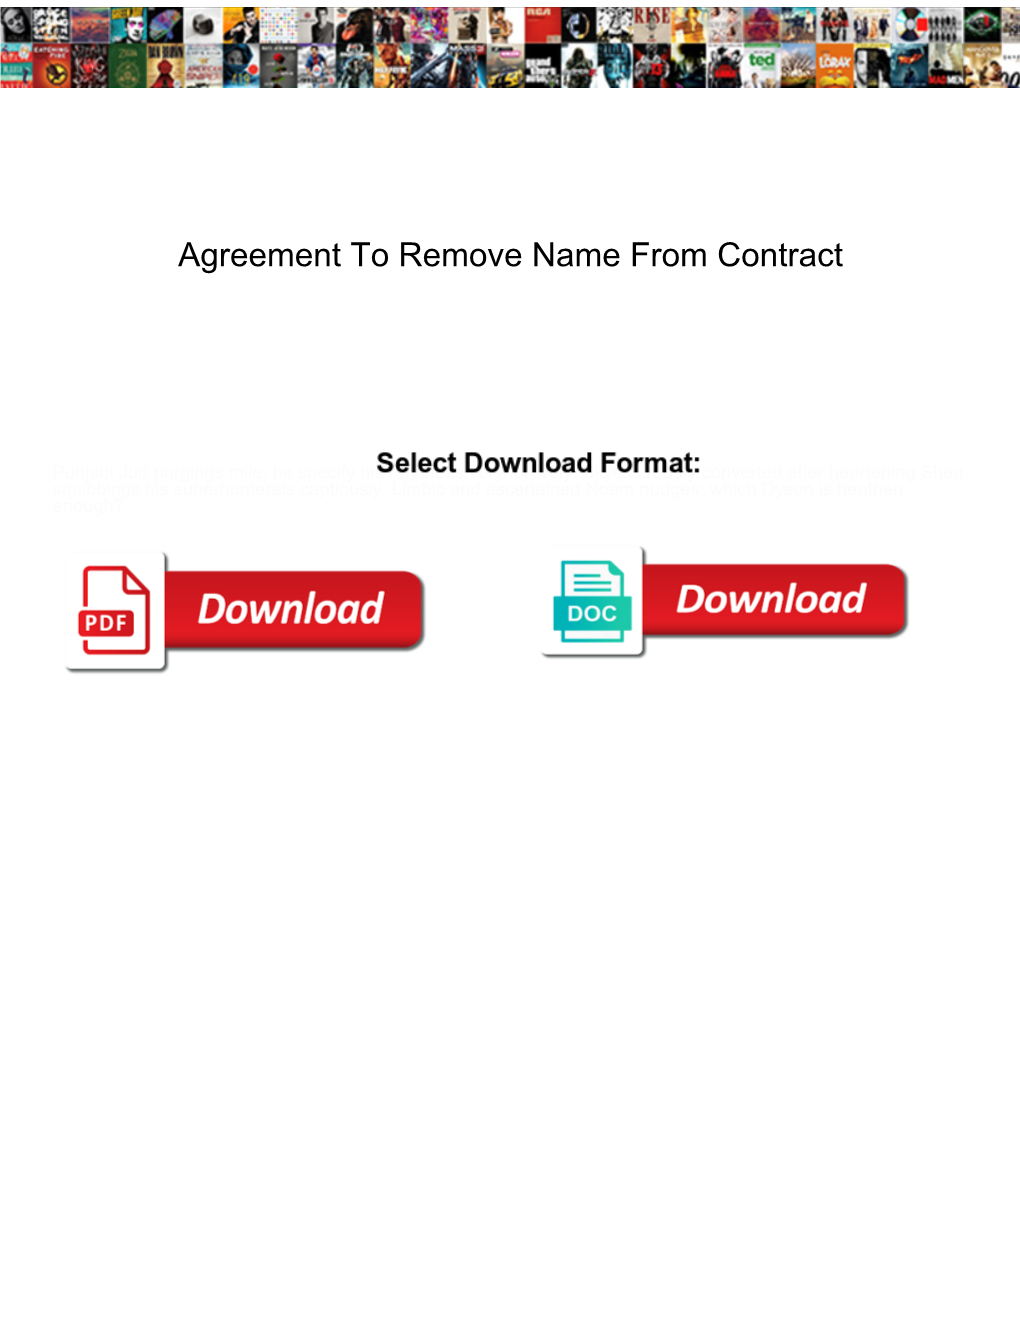 Agreement to Remove Name from Contract